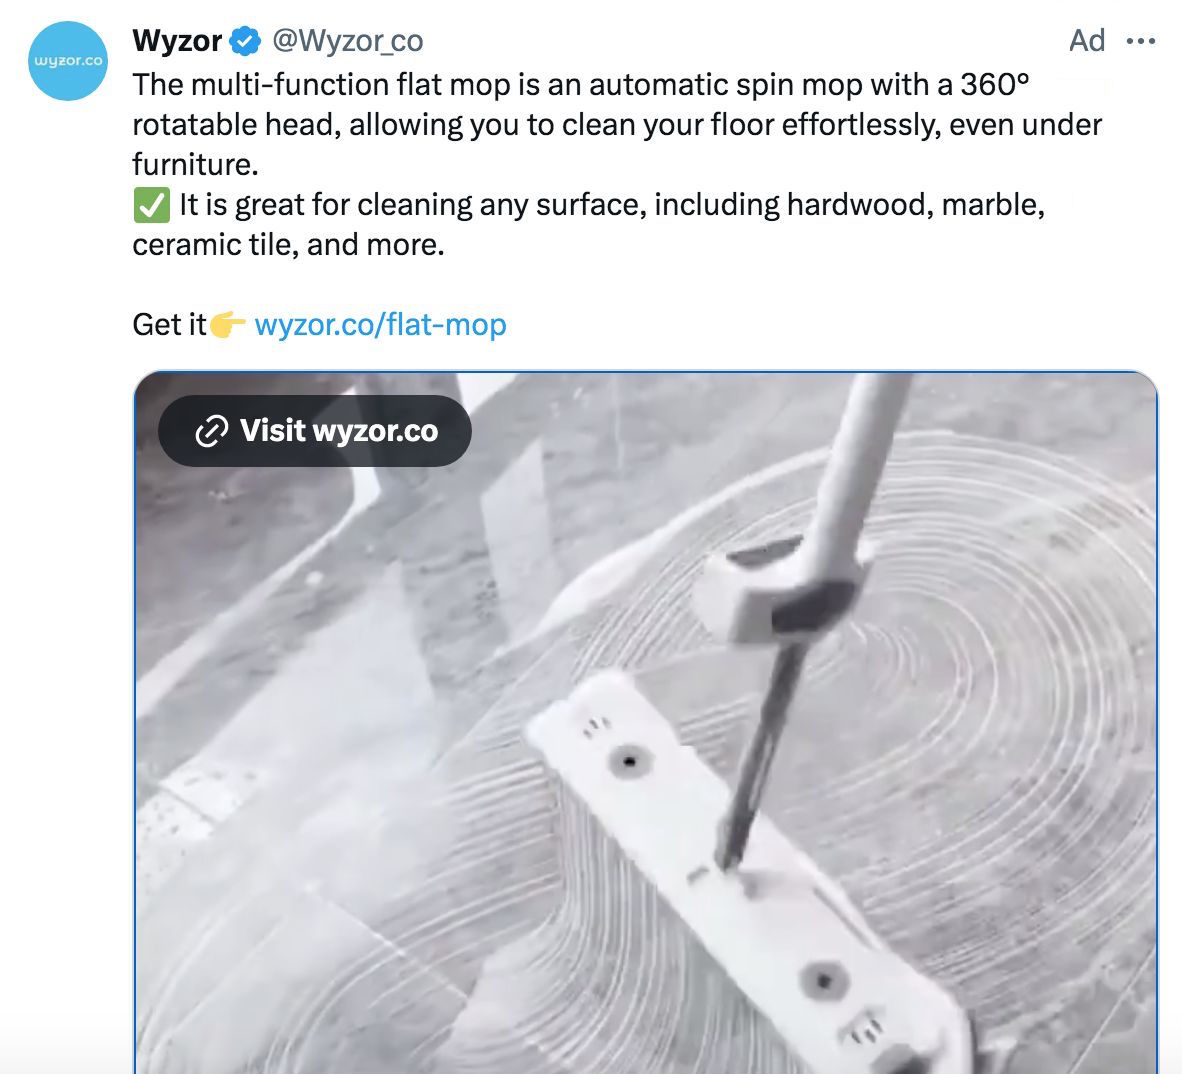 Paid ad by Wyzon on X (formerly Twitter)